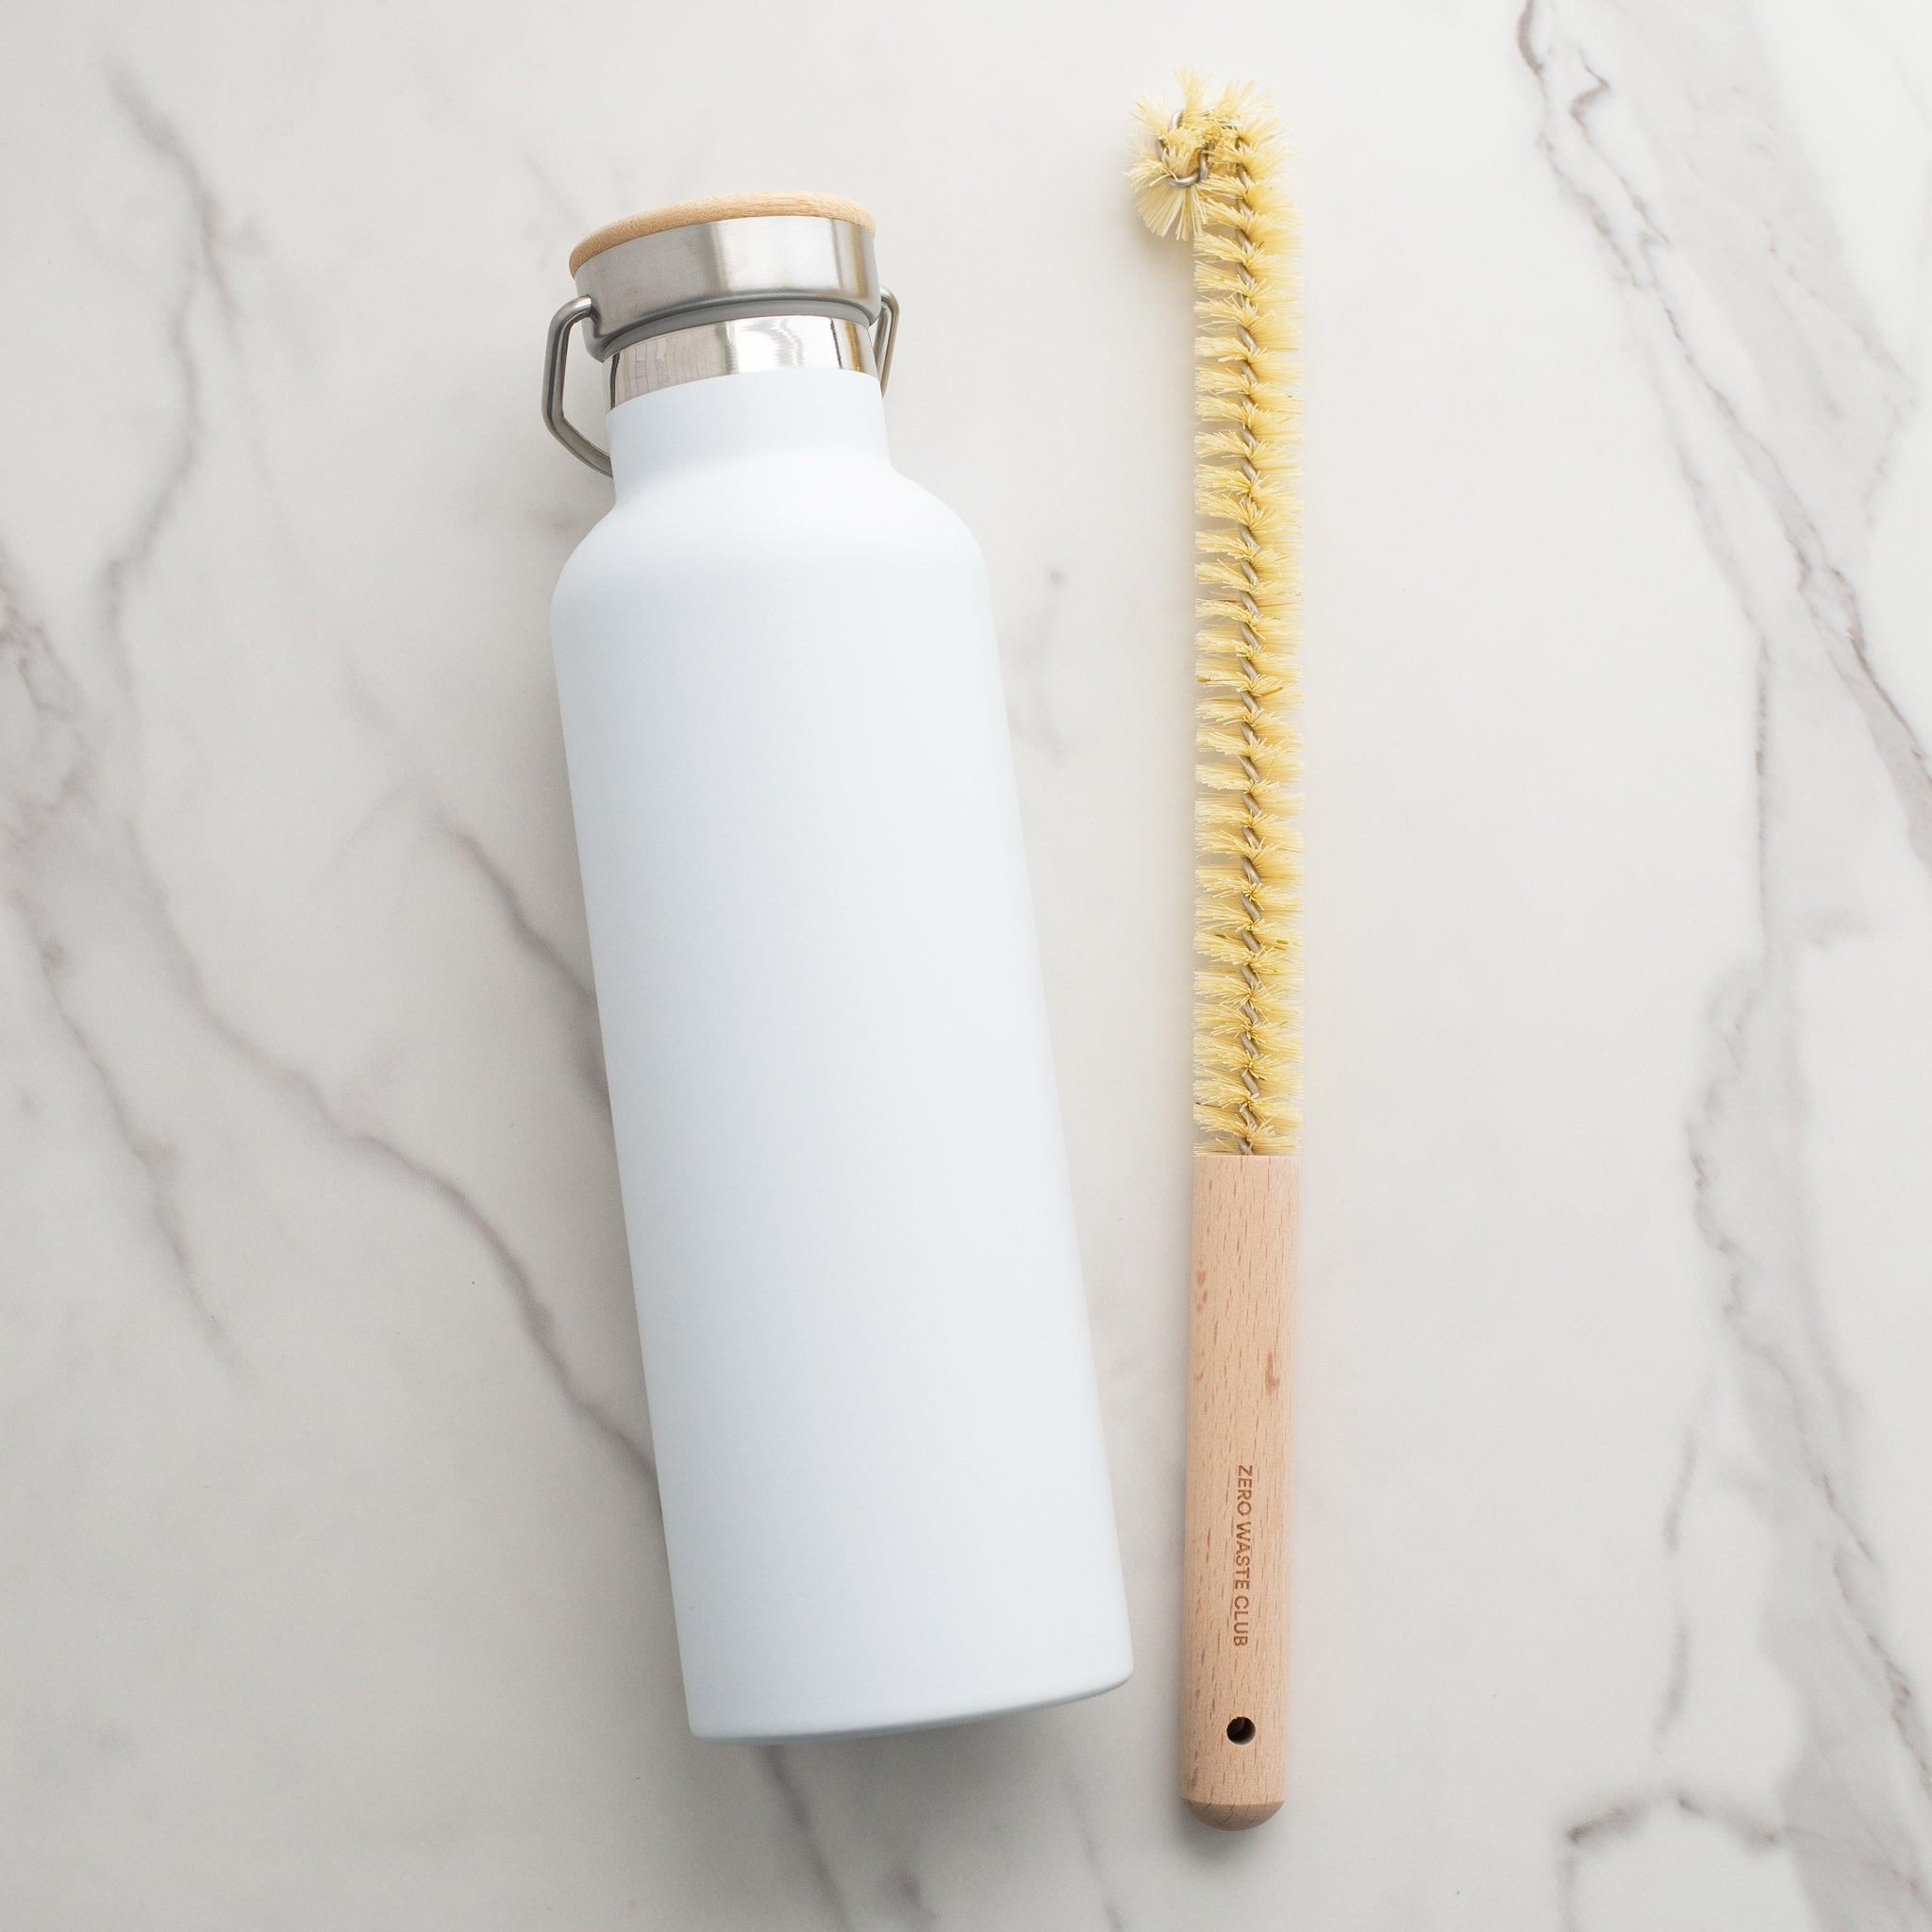 Natural Bottle Cleaning Brush